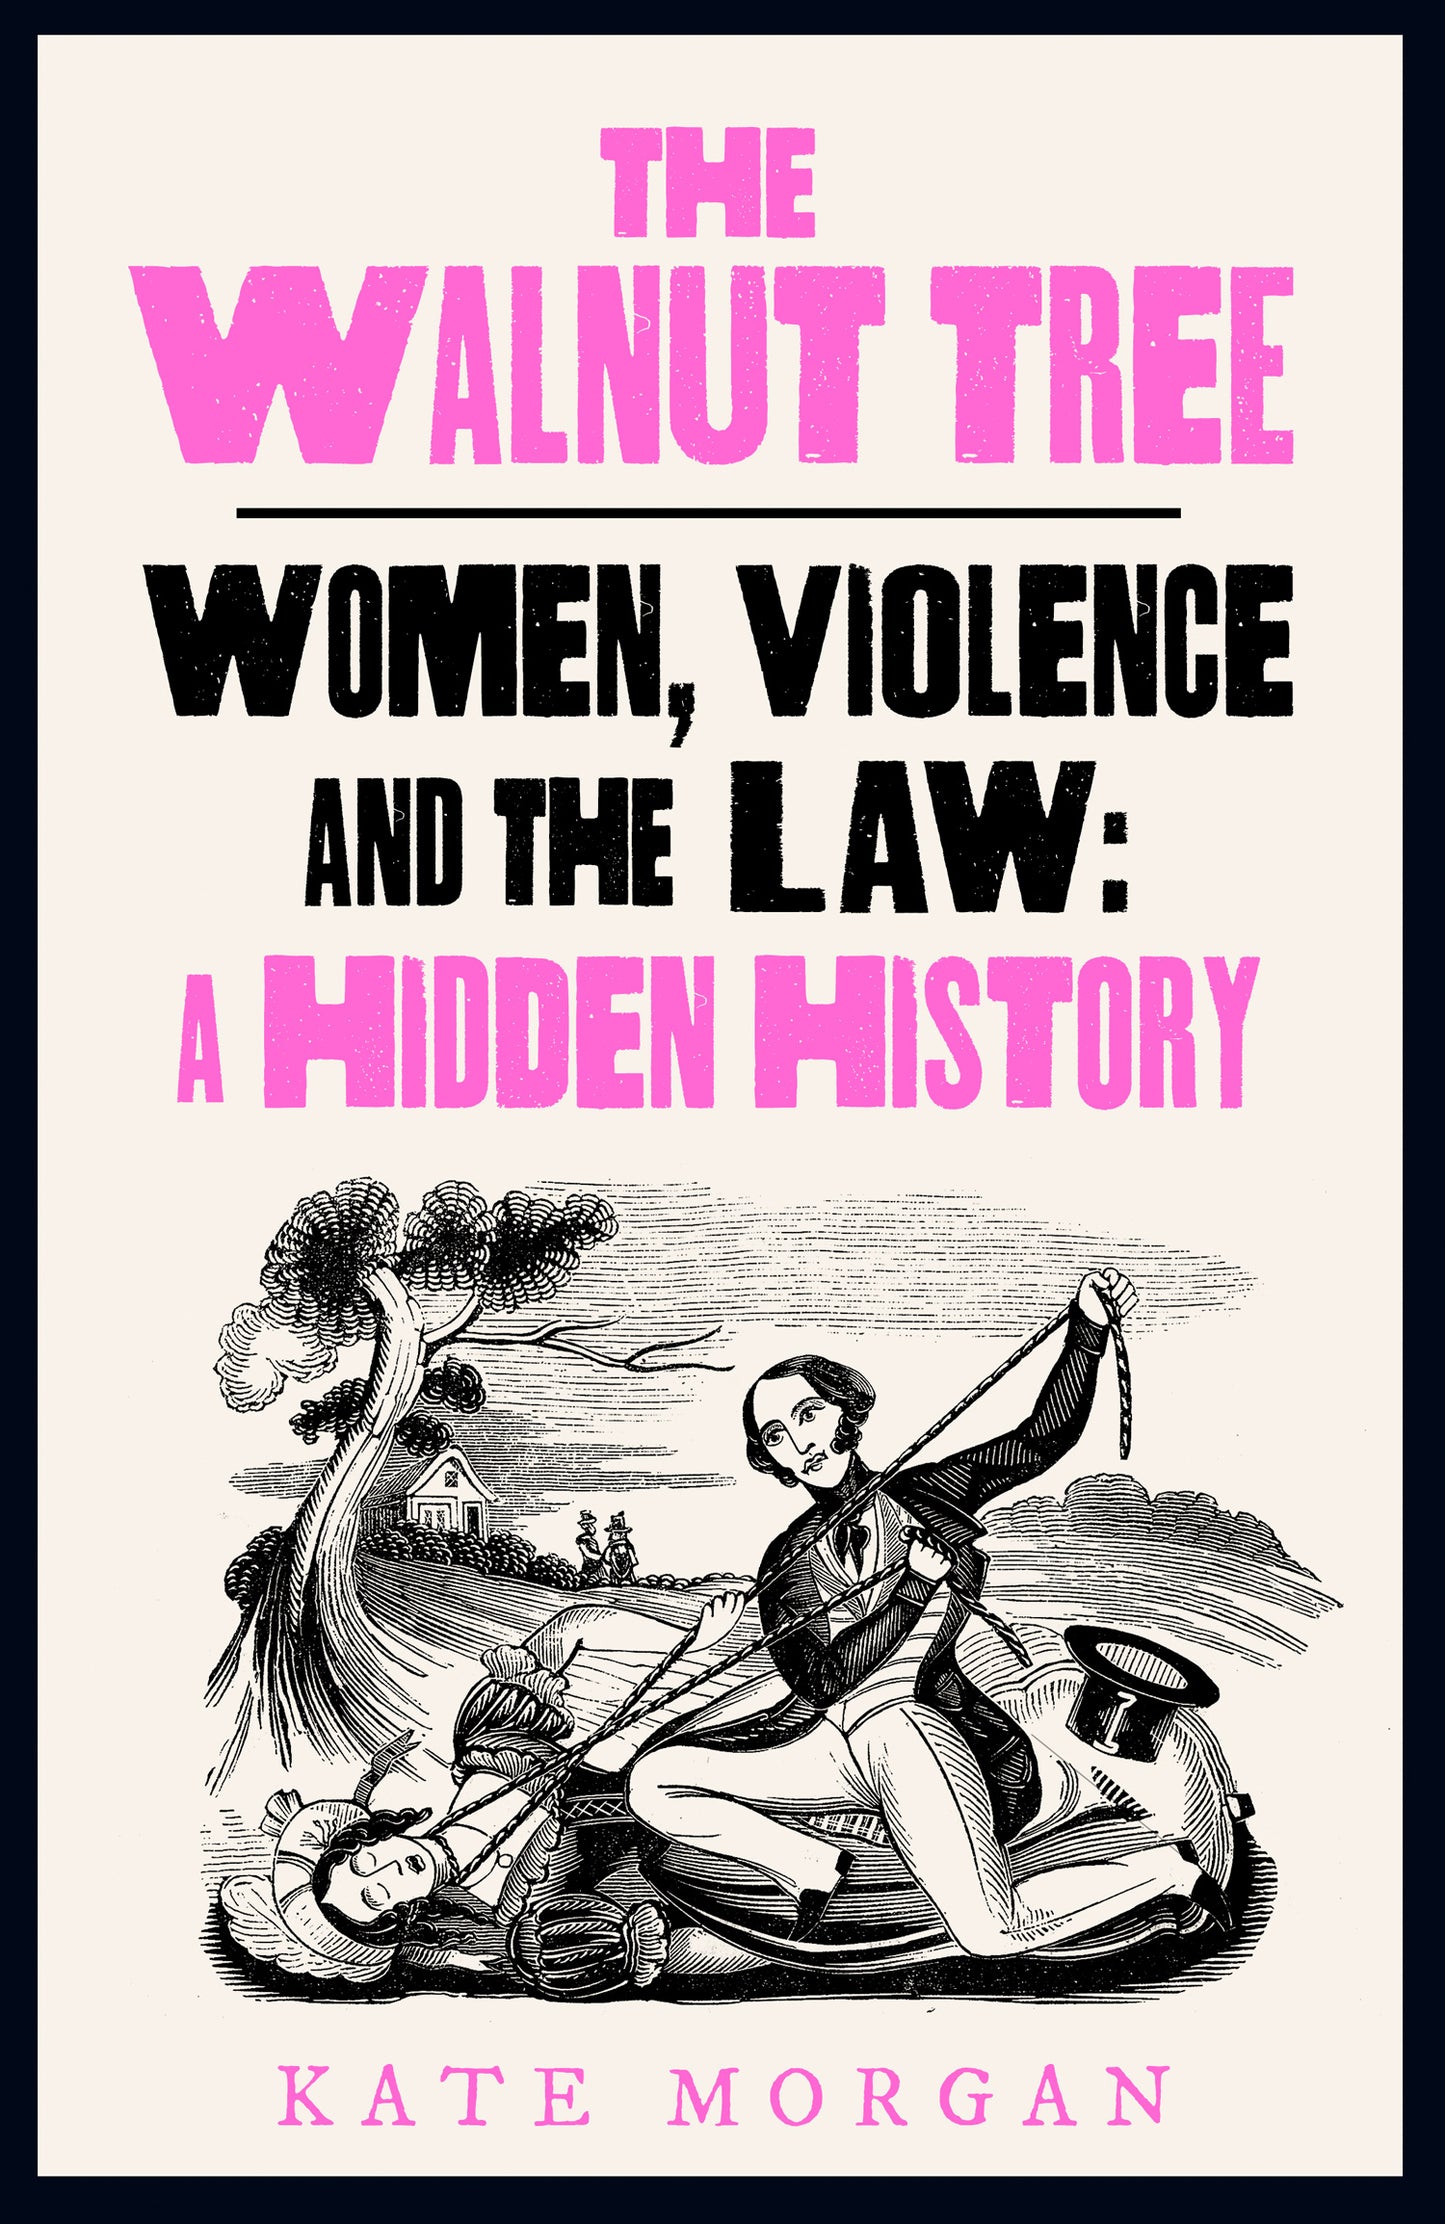 Kate Morgan - The Walnut Tree: Women, Violence and the Law | Wednesday 28 February, 6.30pm